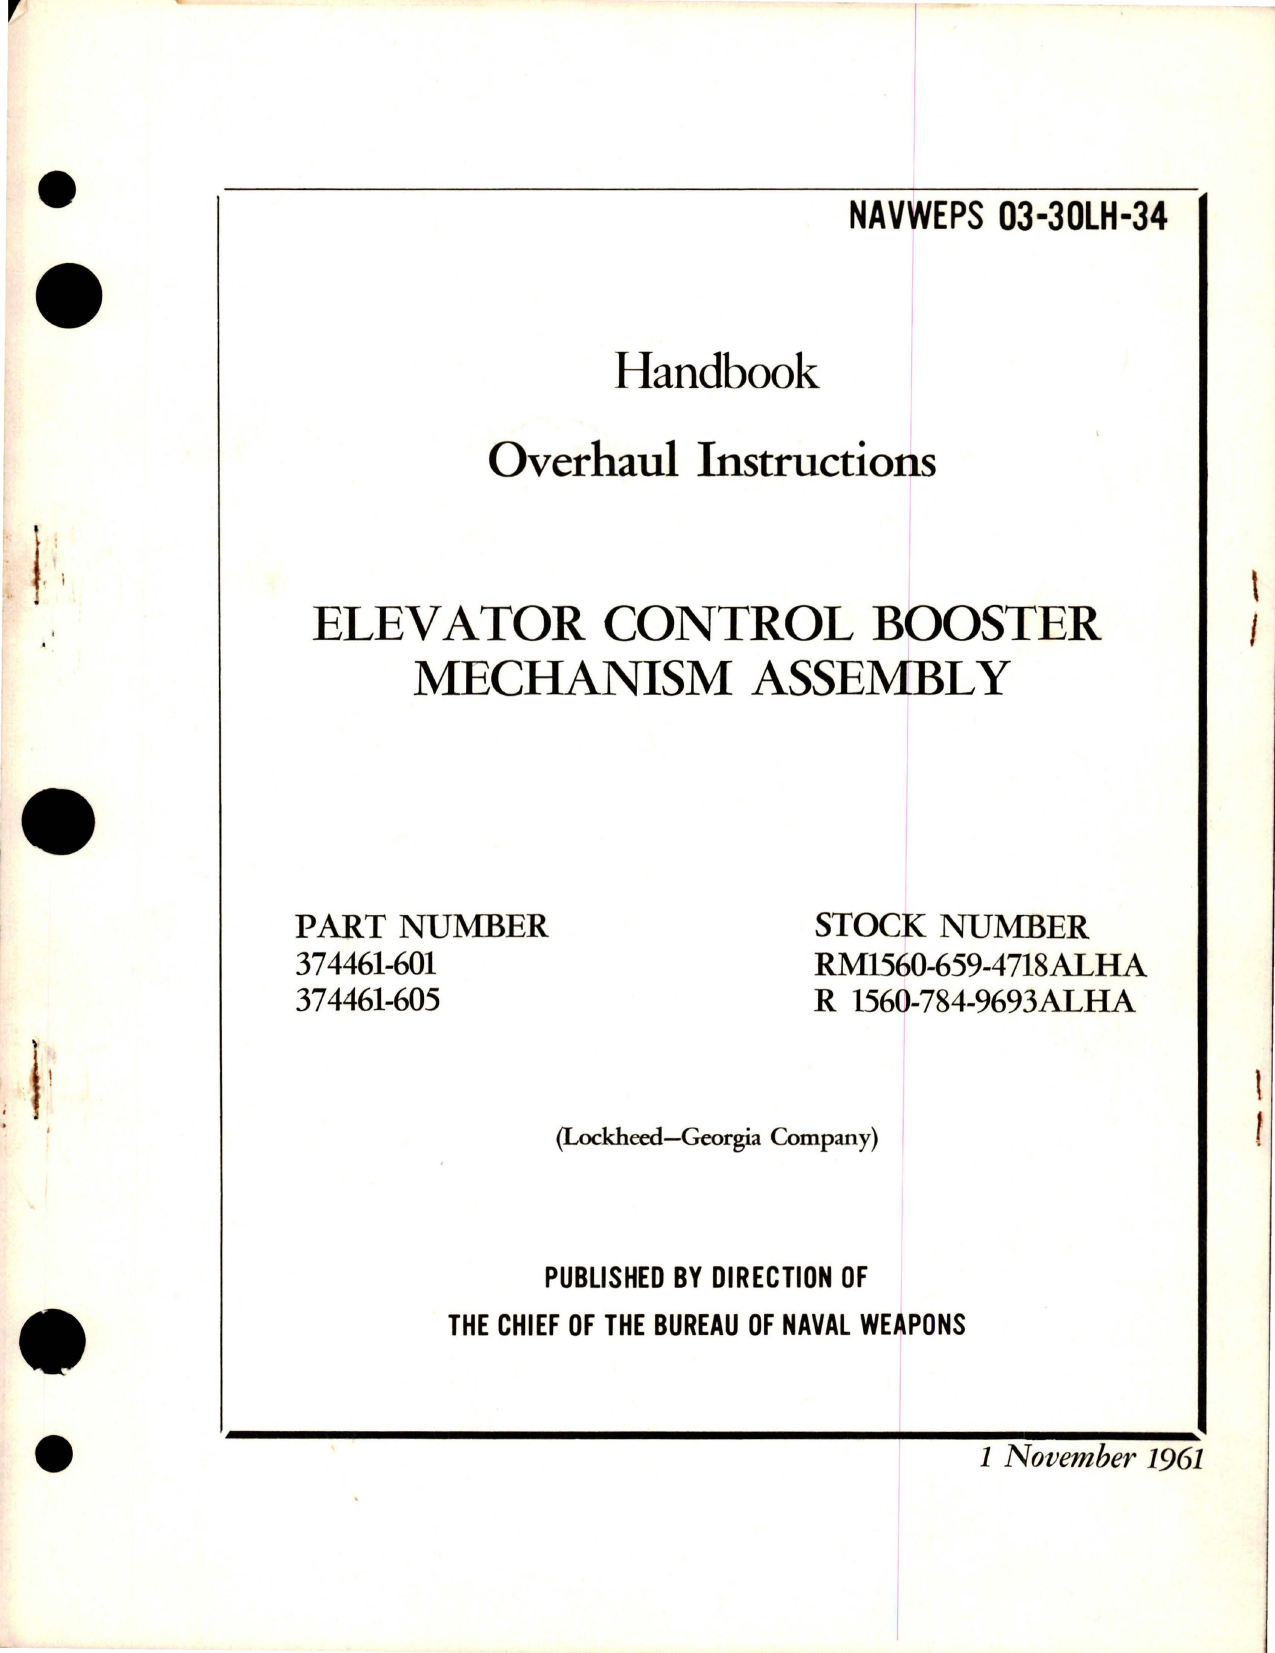 Sample page 1 from AirCorps Library document: Overhaul Instructions for Elevator Control Booster Mechanism Assembly - Parts 374461-601 and 374461-605